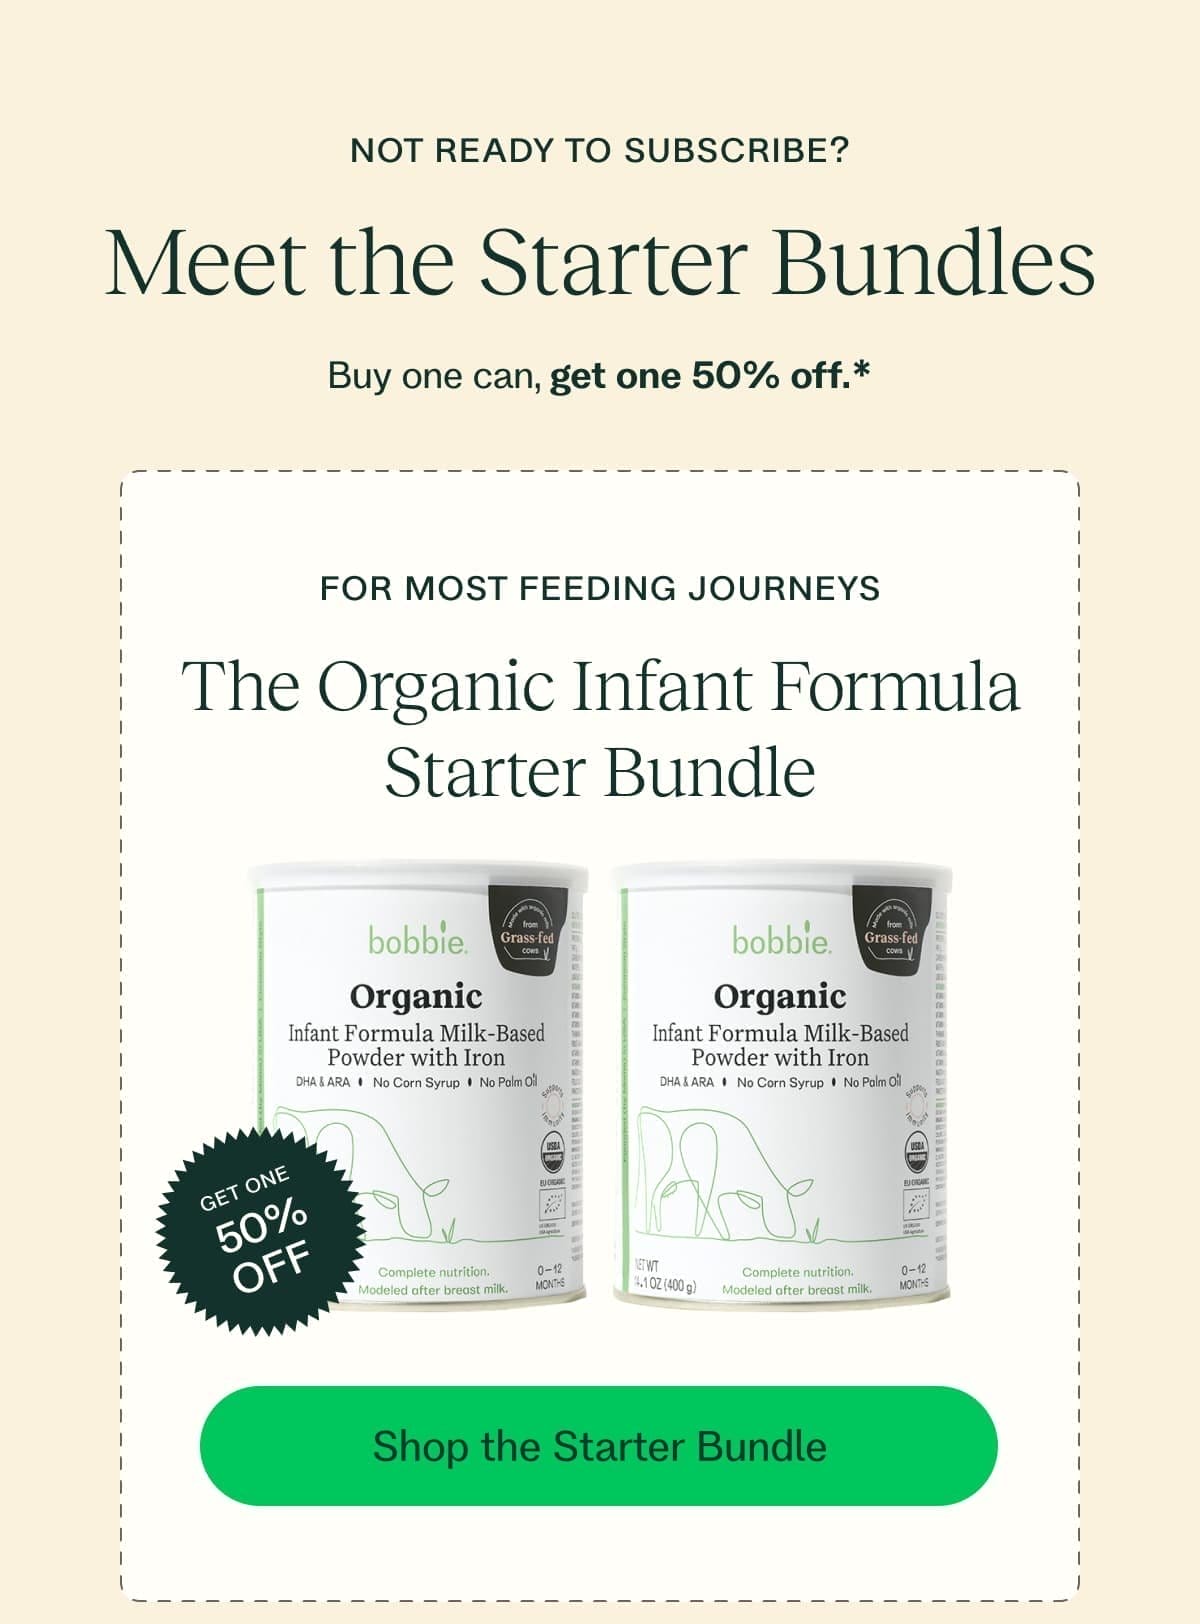 NOT READY TO SUBSCRIBE? Meet the Starter Bundles Buy one can, get one 50% off.* FOR MOST FEEDING JOURNEYS The Organic Infant Formula Starter Bundle GET ONE 50% OFF Shop the Starter Bundle